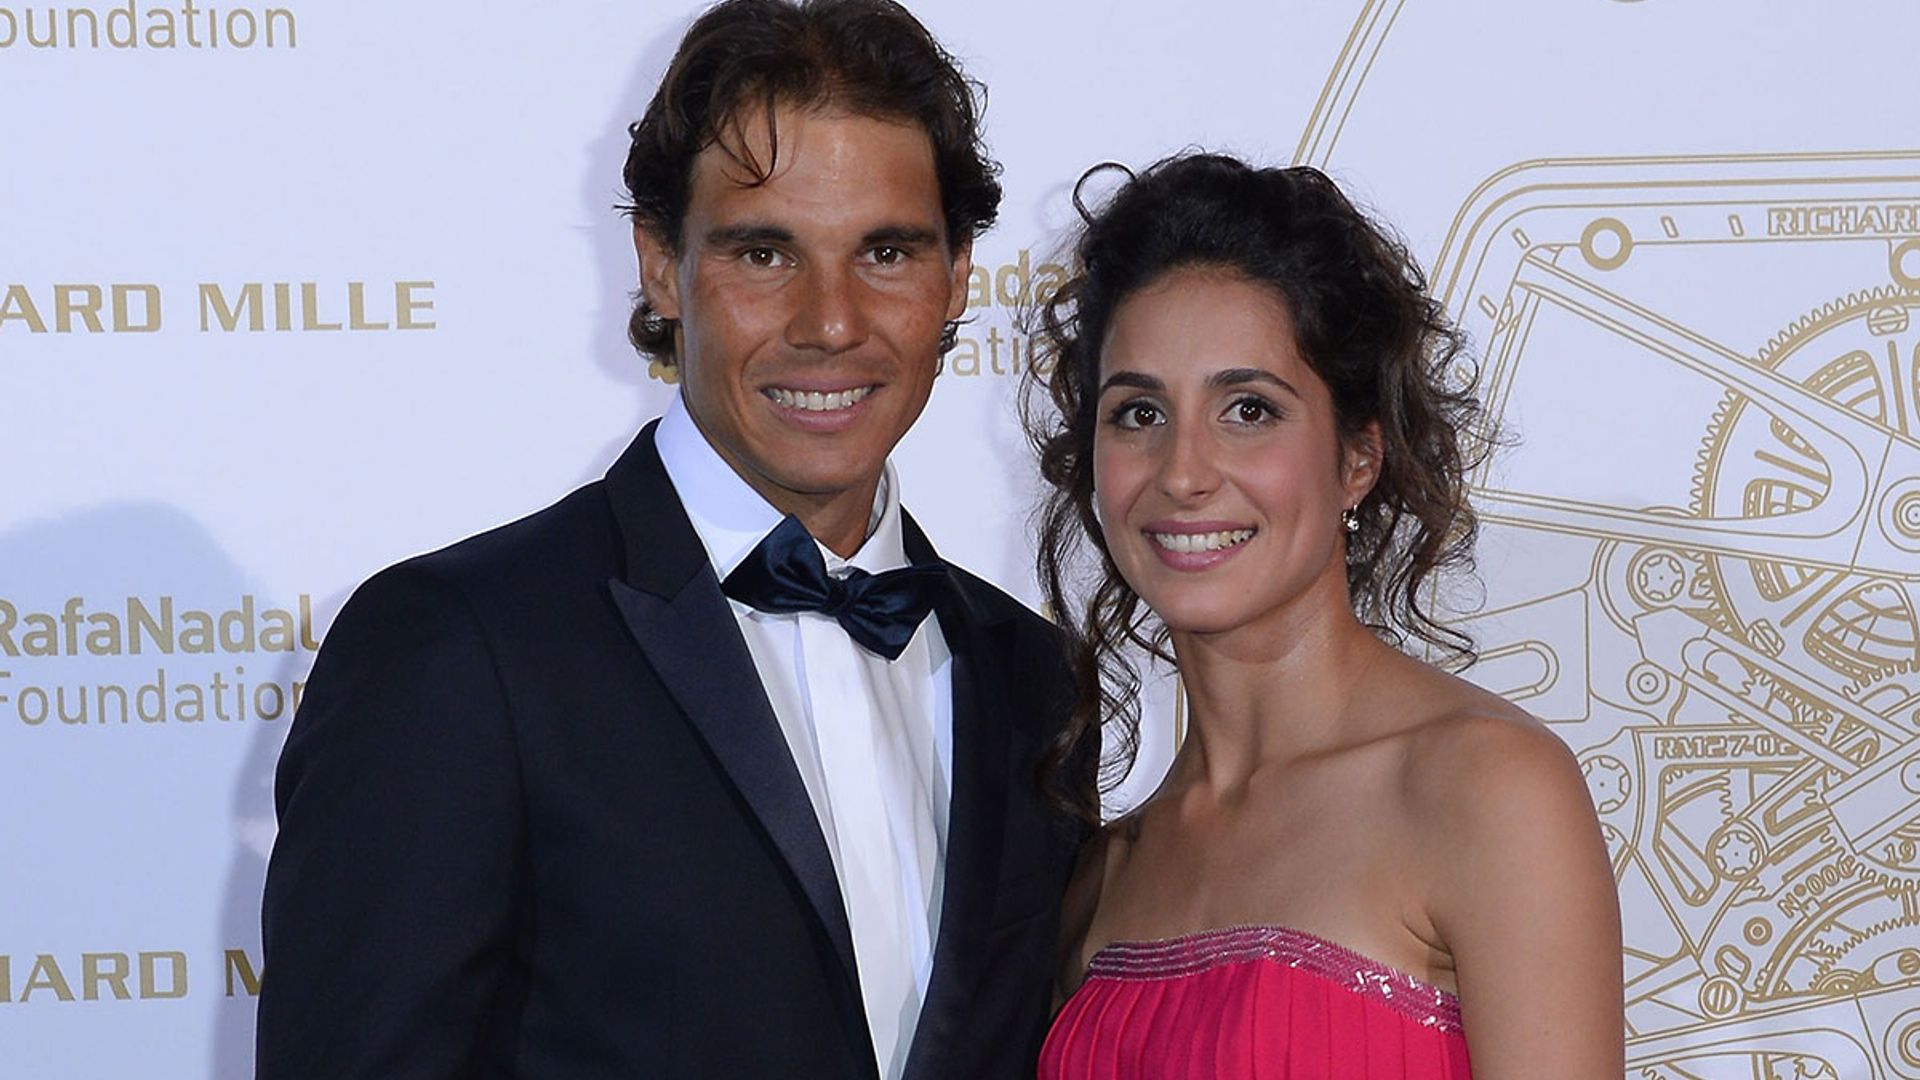 World Exclusive Rafa Nadal Engaged To Girlfriend Of 14 Years Mery Perelló Hello